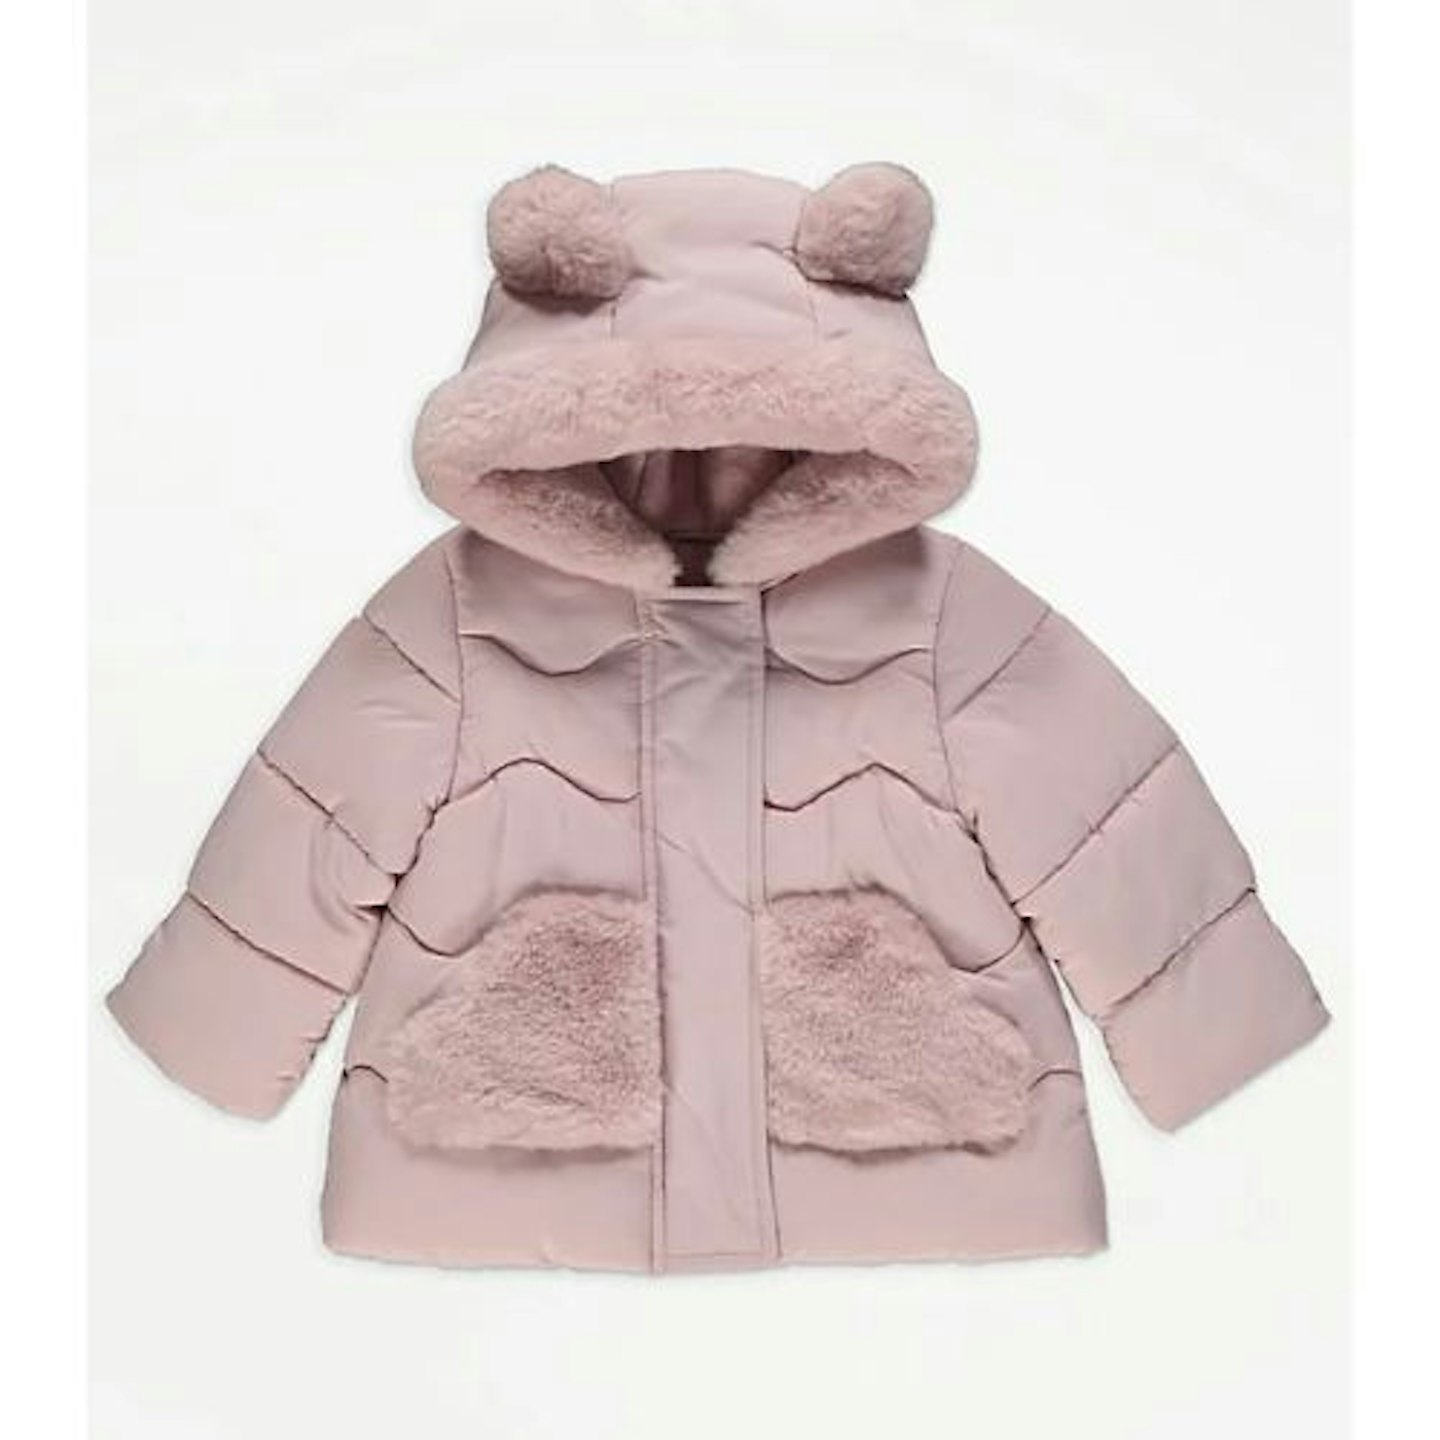 Best toddler winter coats Pink Faux Fur Padded Teddy Coat